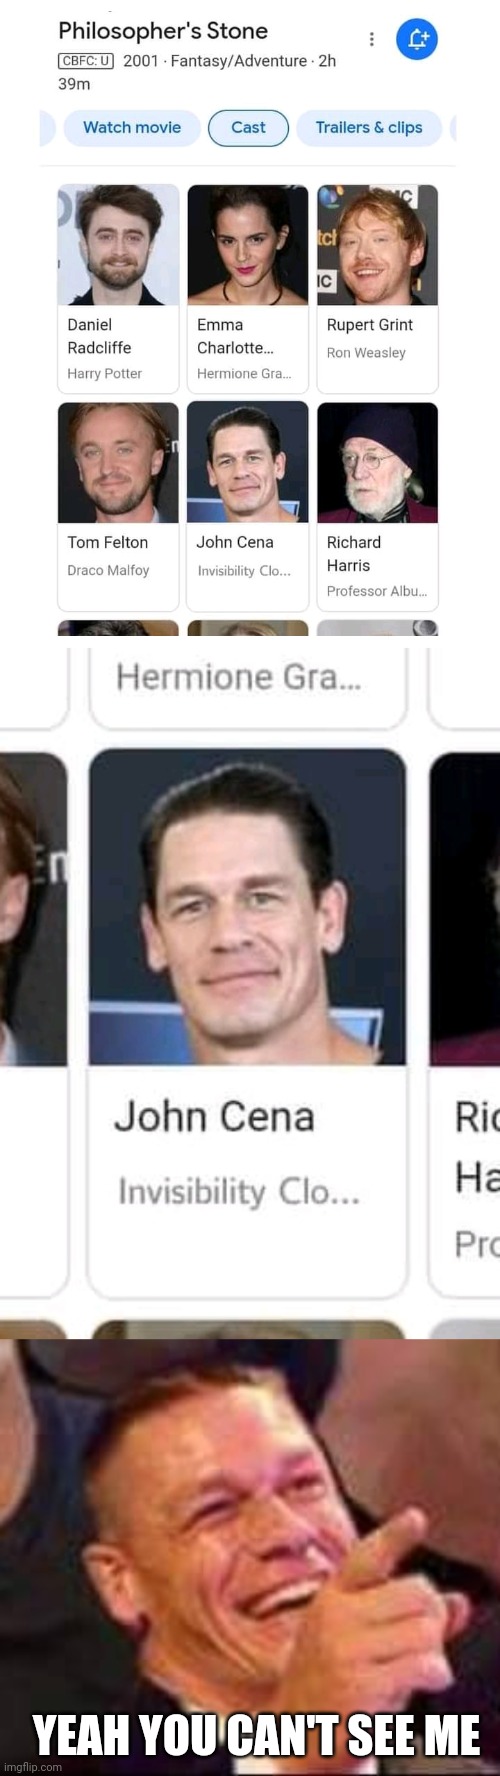 THE PERFECT ACTOR FOR THE PART |  YEAH YOU CAN'T SEE ME | image tagged in john cena laughing,harry potter,john cena,you can't see me | made w/ Imgflip meme maker